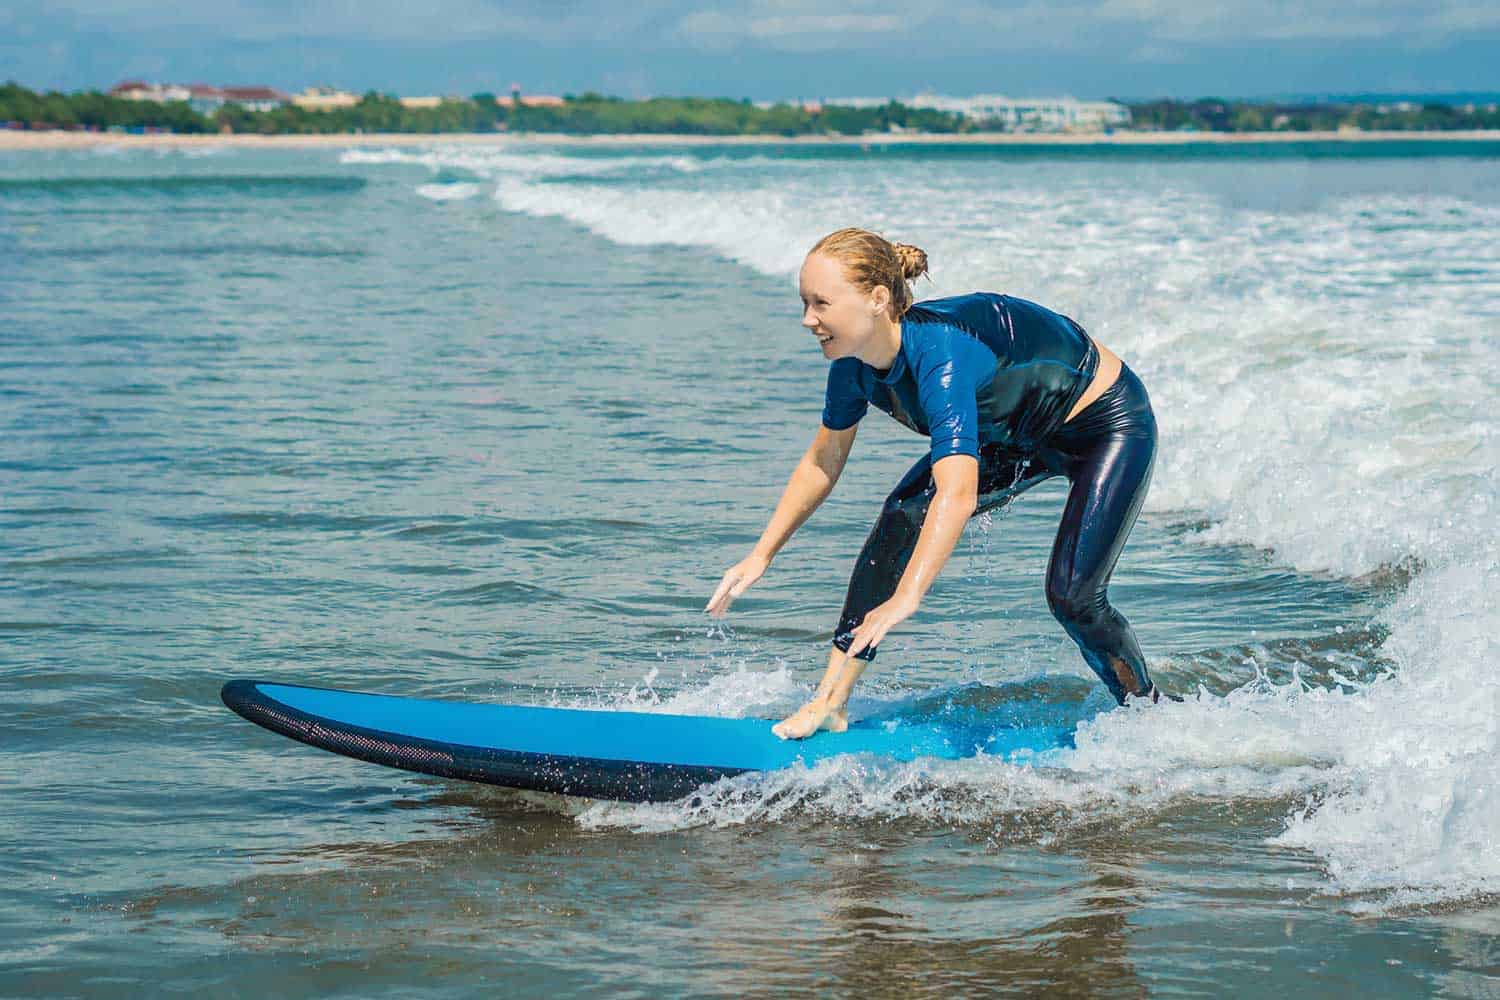 Joyful young woman beginner surfer with blue surfboard having fun on small waves